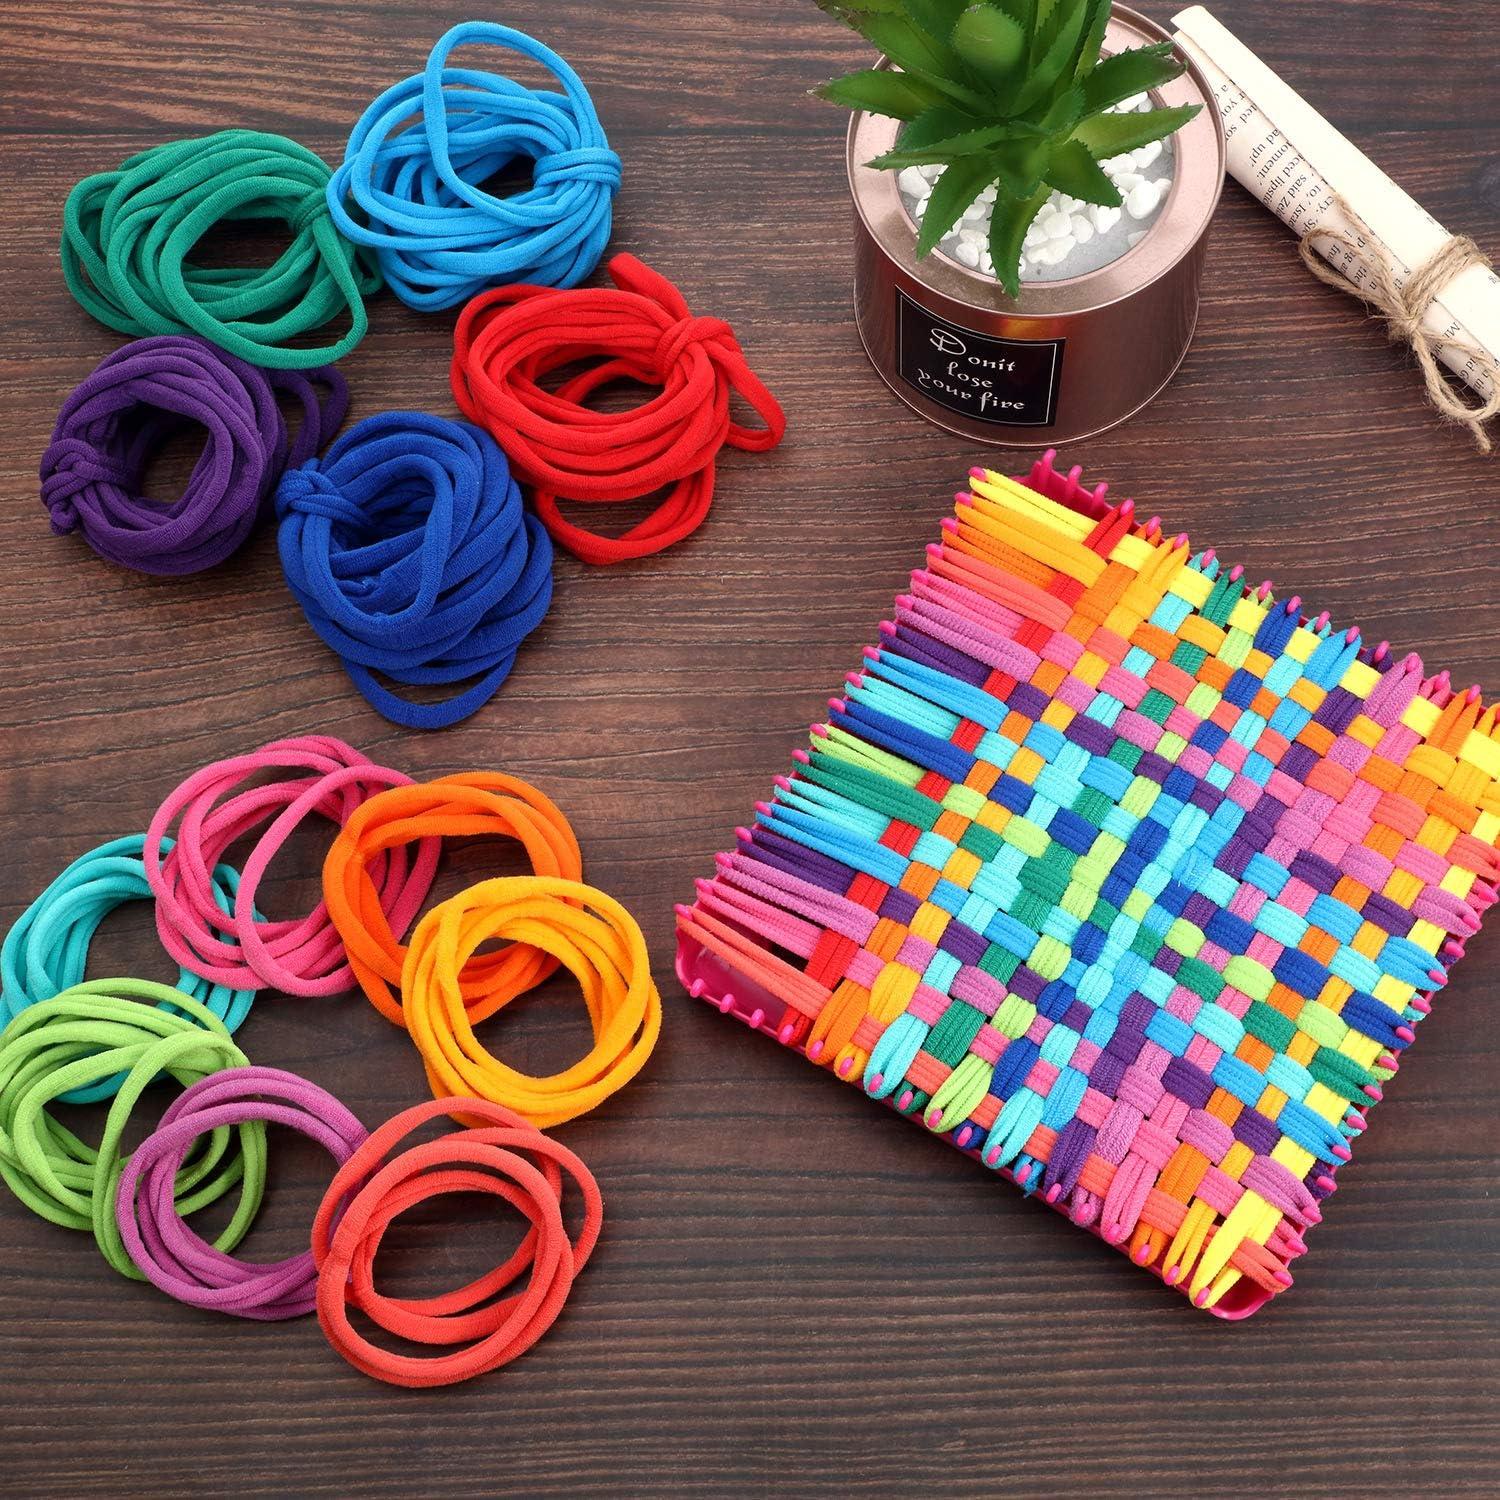 12 Colors Loop Potholder Loops Weaving Loom Loops Weaving Craft Loops with  Multiple Colors for DIY Crafts Supplies Compatible with 7 Inch Weaving Loom  (192 Pieces)